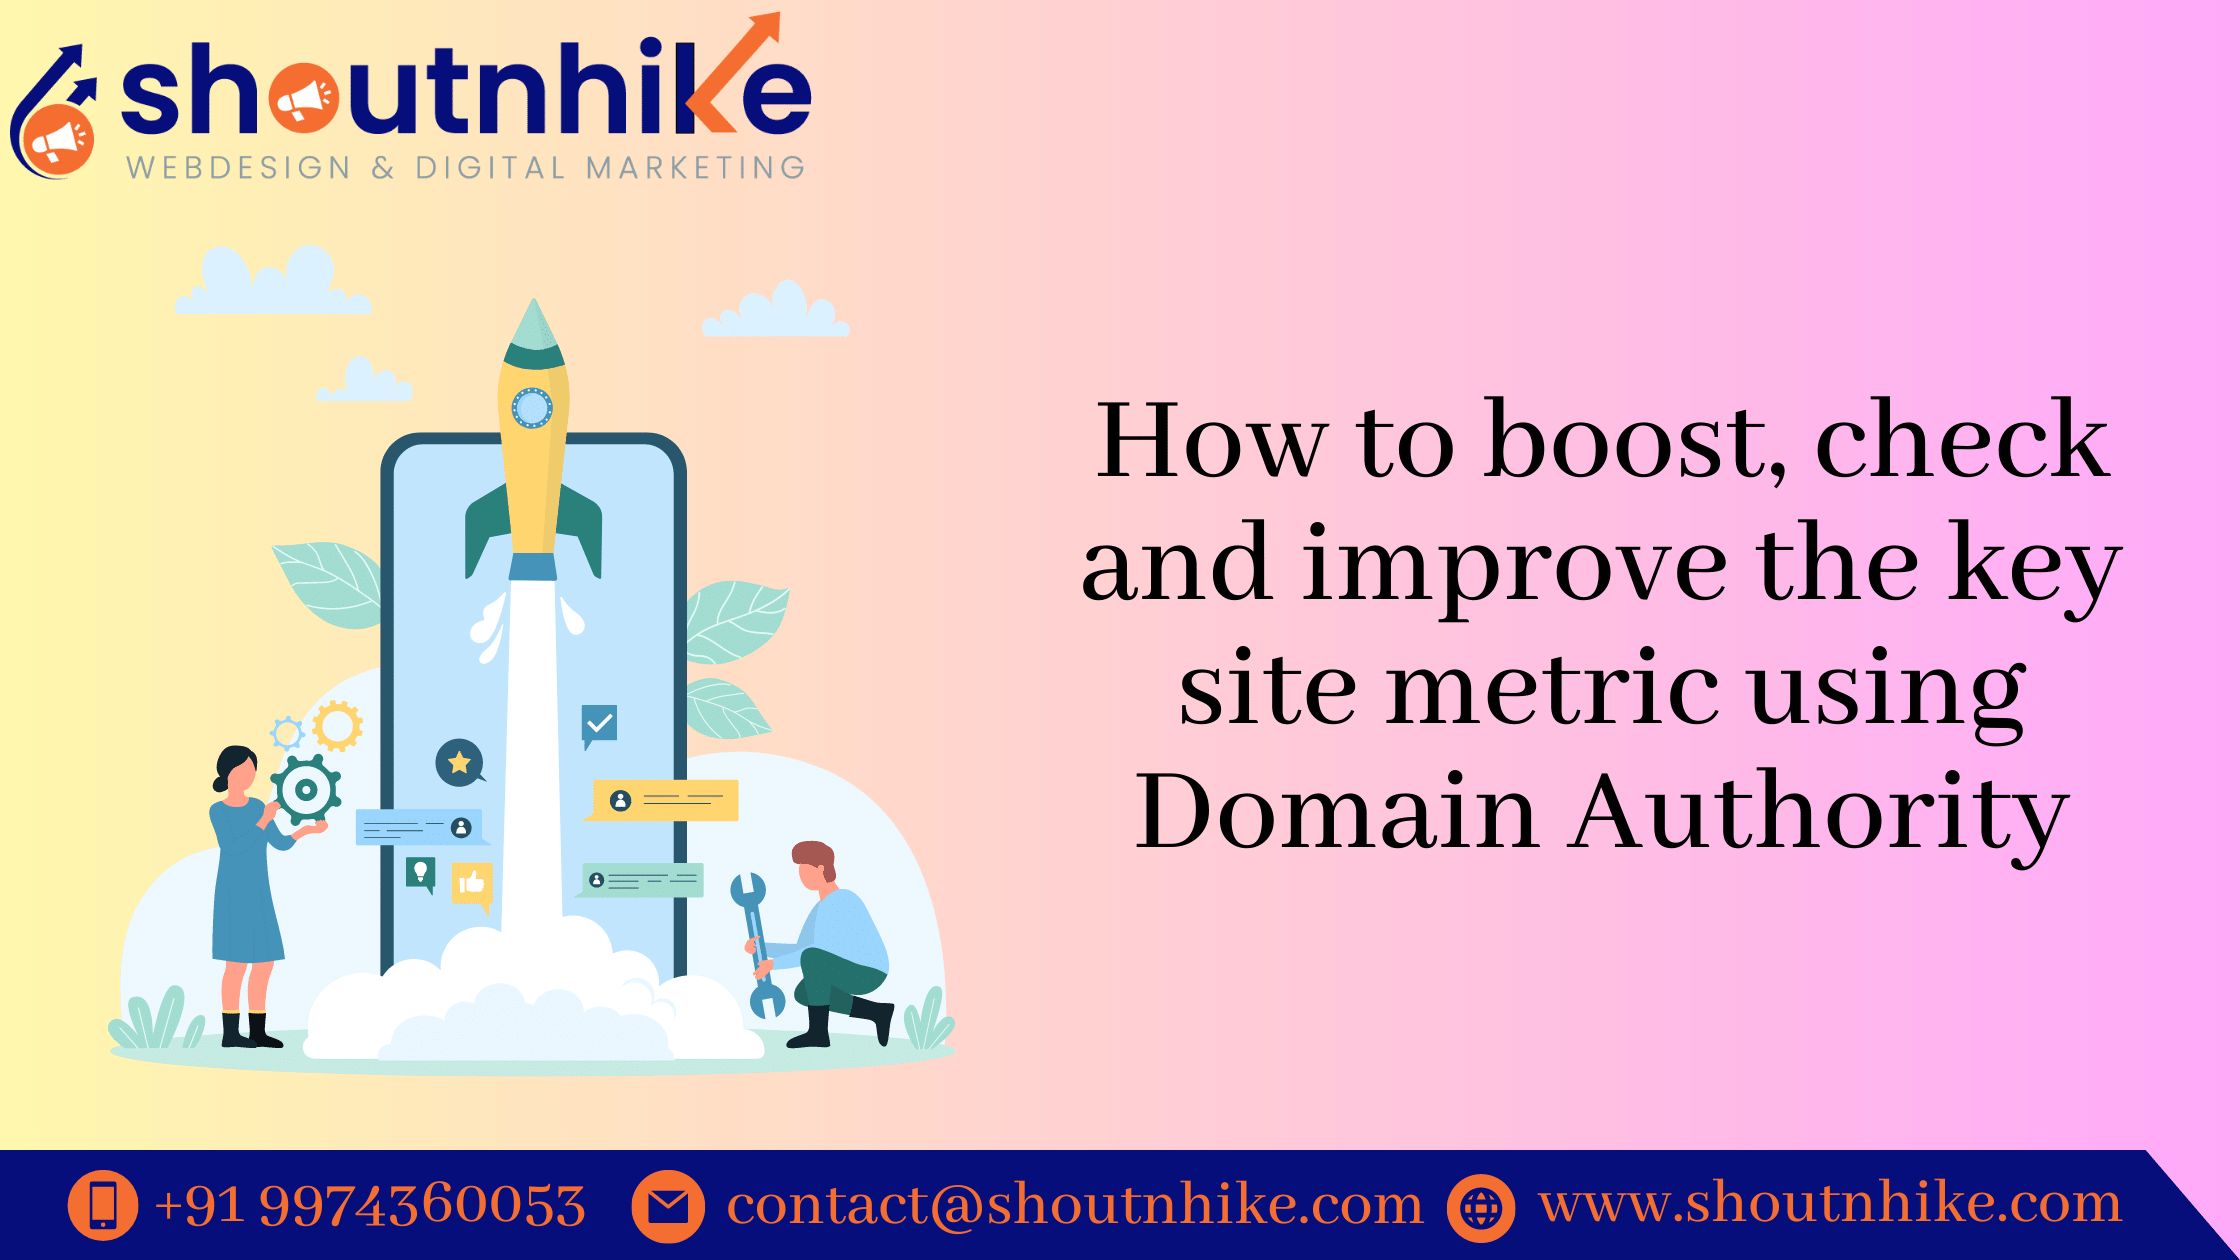 How to boost, check and improve the key site metric using Domain Authority